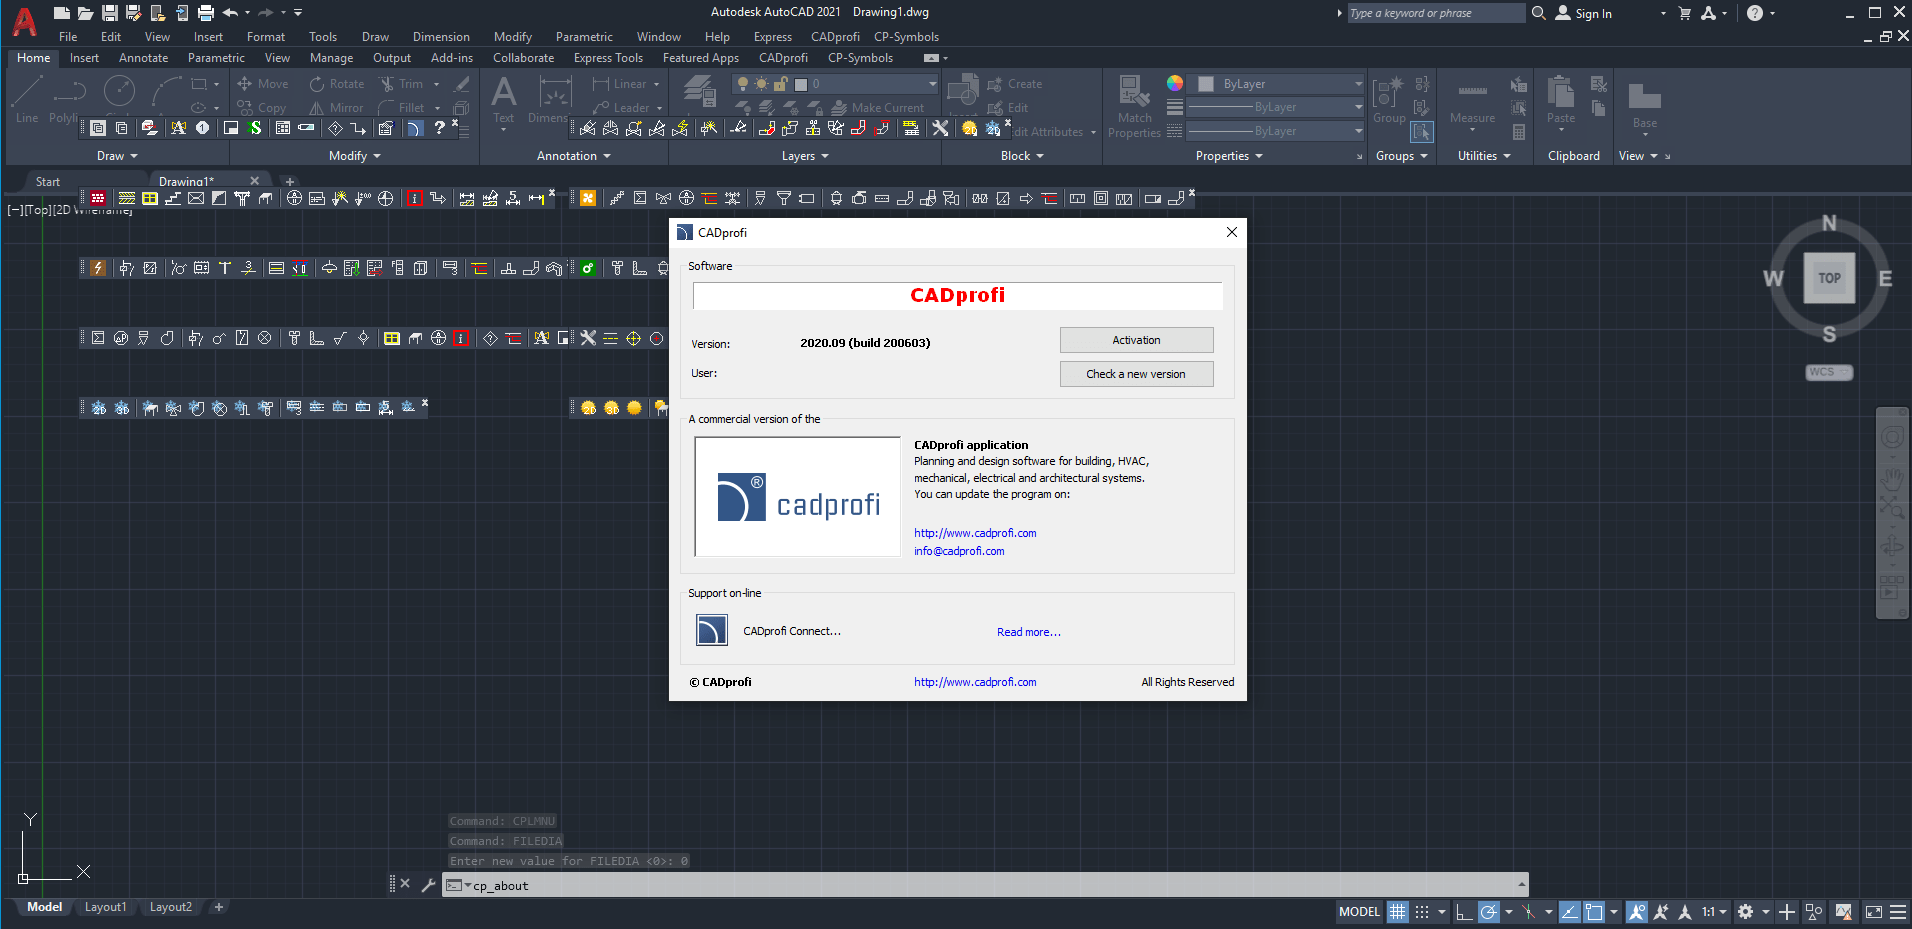 Working with CADprofi 2020.09 build 200630 full